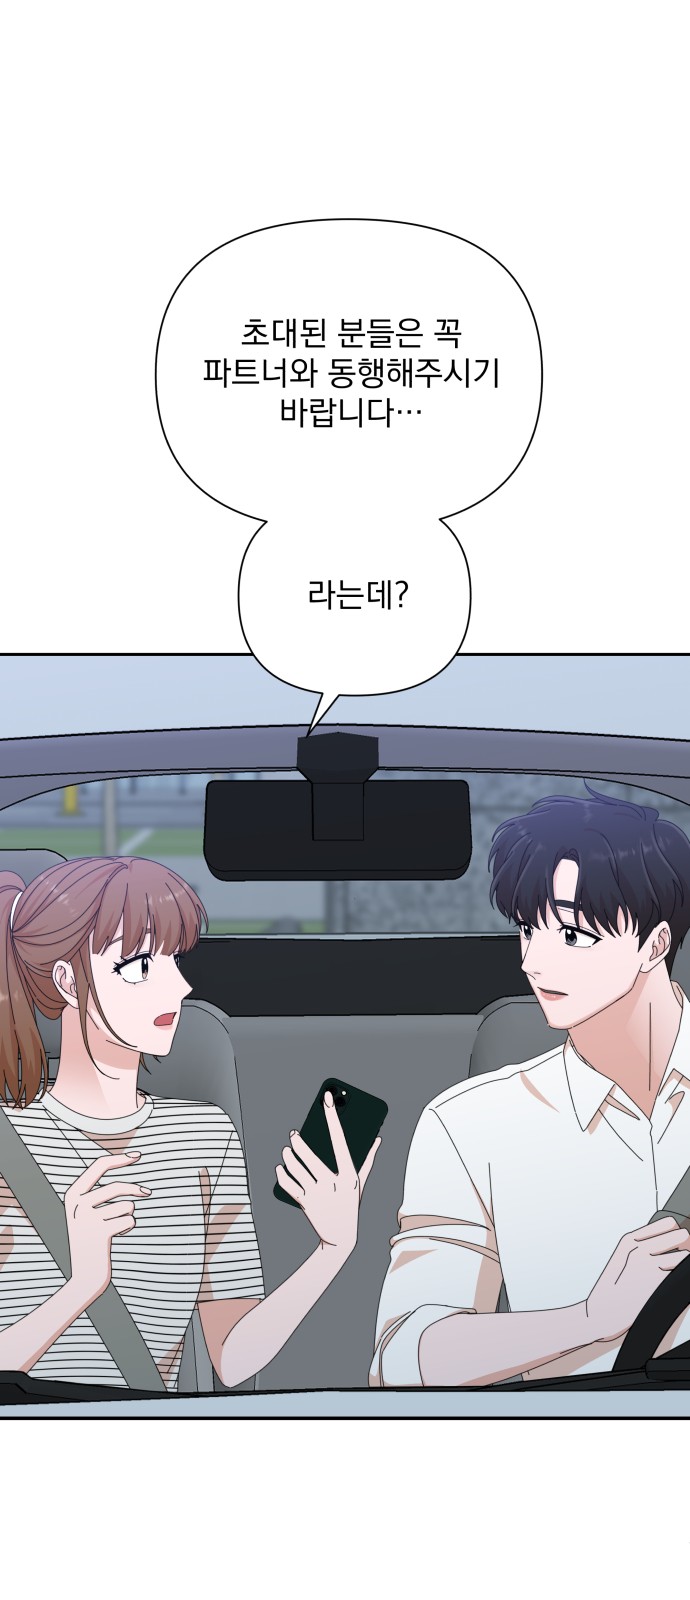 The Man With Pretty Lips - Chapter 34 - Page 2